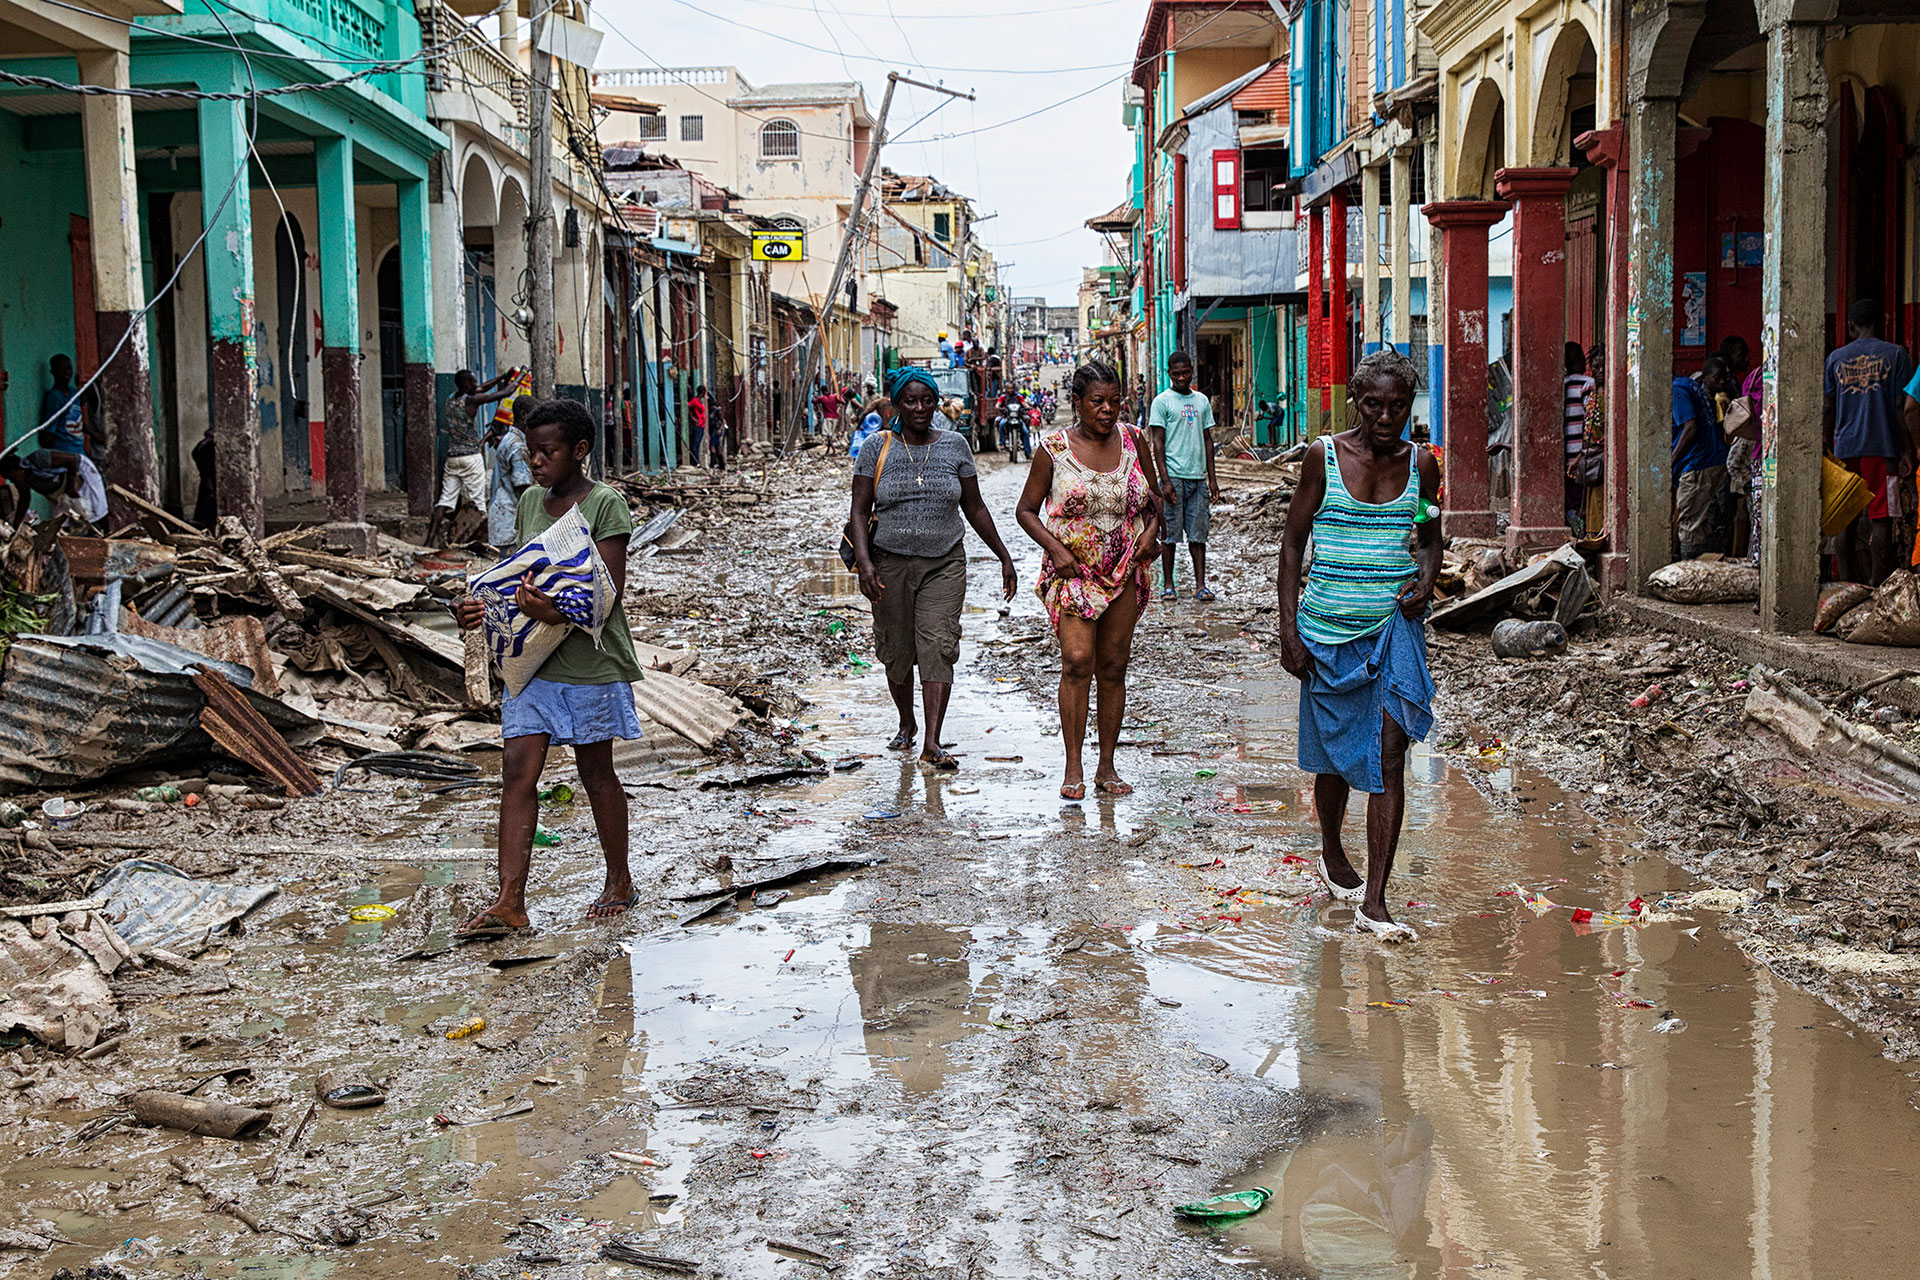 Haiti is regularly hit by cyclones and other heavy rains, as here in October 2016, the area of Les Cayes after Hurricane Matthew.